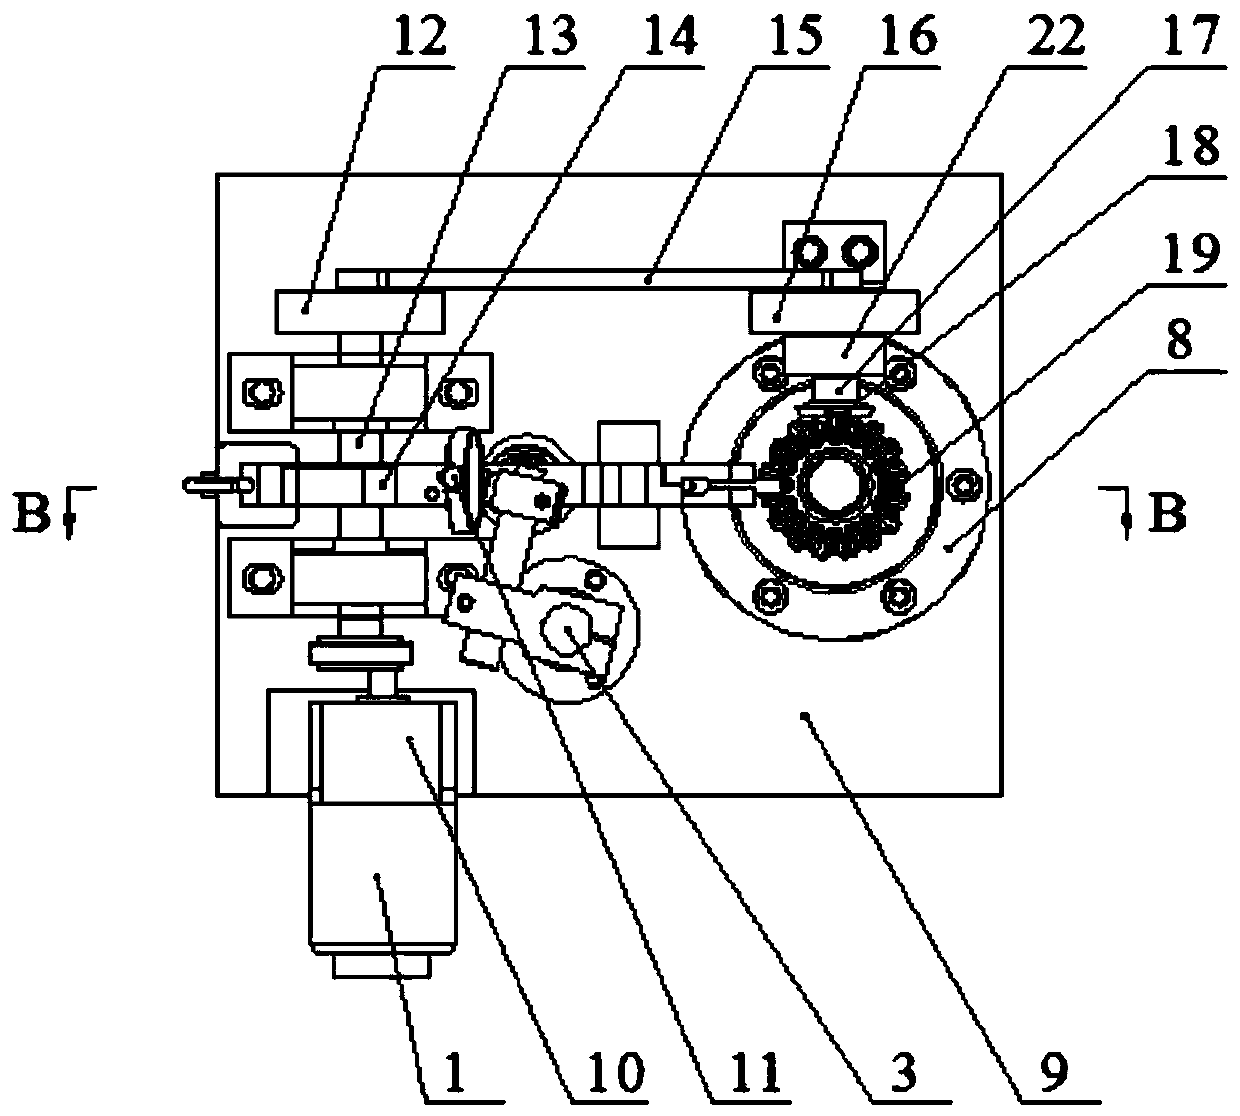 Automobile bevel gear automatic detecting and bouncing device